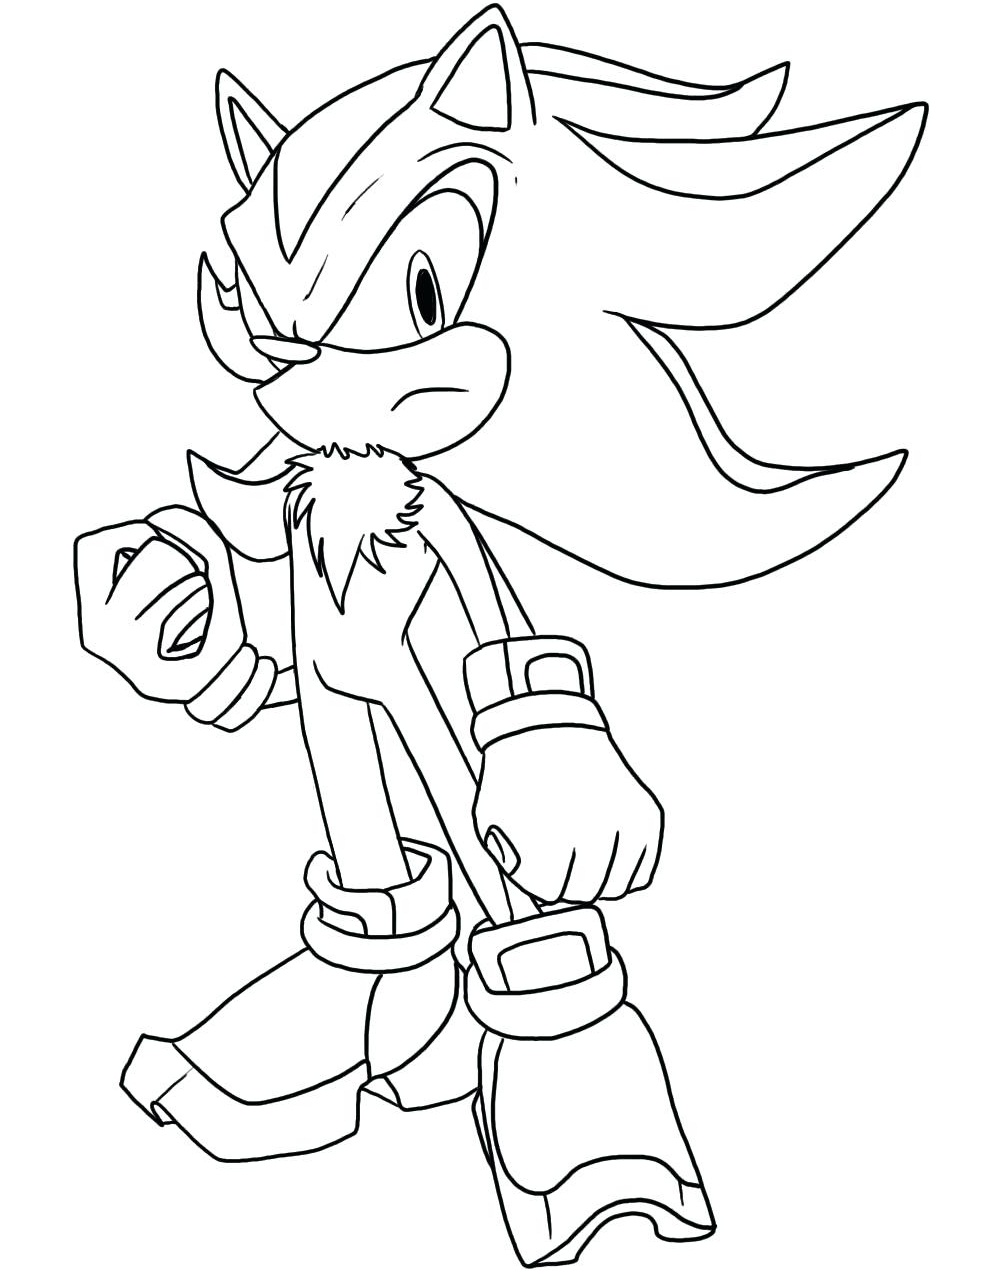 Silver The Hedgehog Coloring Page - Free Printable Coloring Pages for Kids